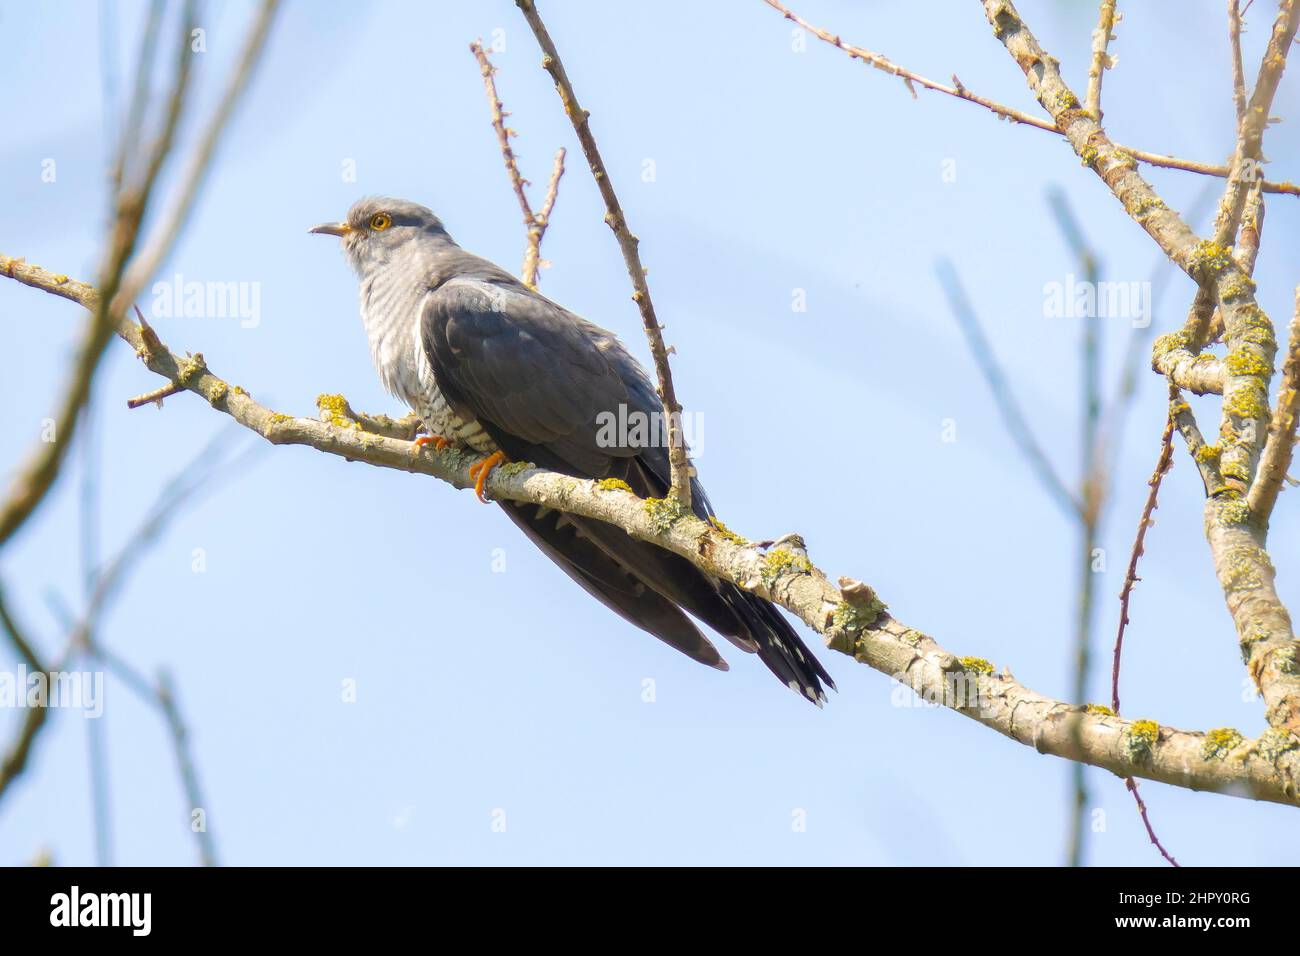 Common cuckoo, Cuculus canorus, resting and singing in a tree. It is a brood parasite, which means it lays eggs in the nests of other bird species, du Stock Photo